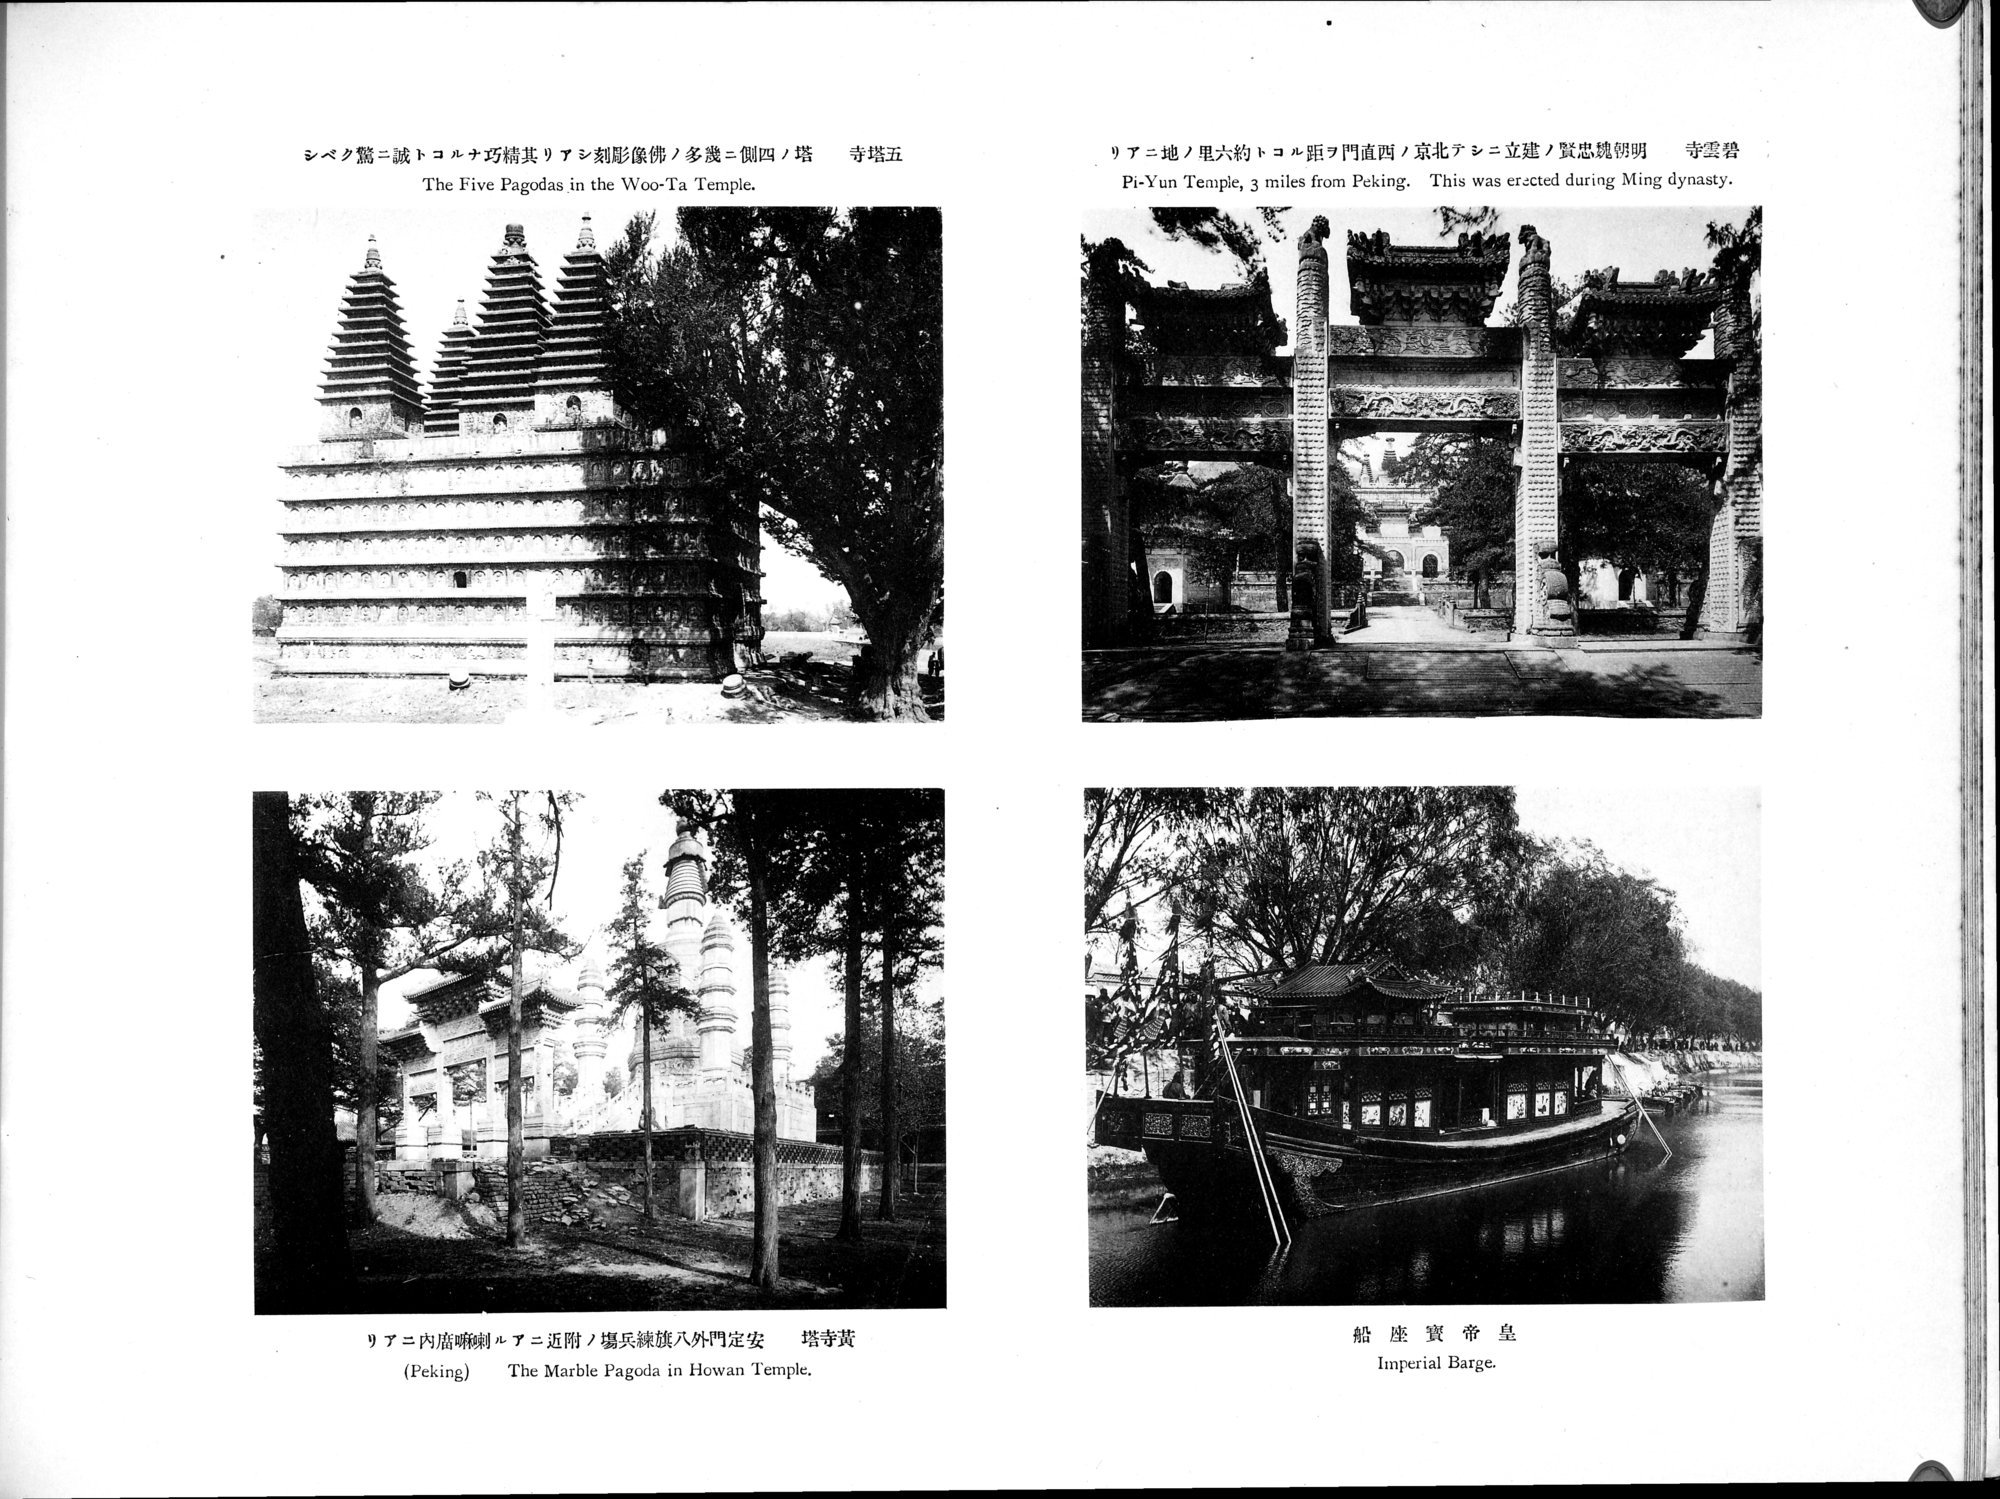 Views and Custom of North China : vol.1 / Page 181 (Grayscale High Resolution Image)